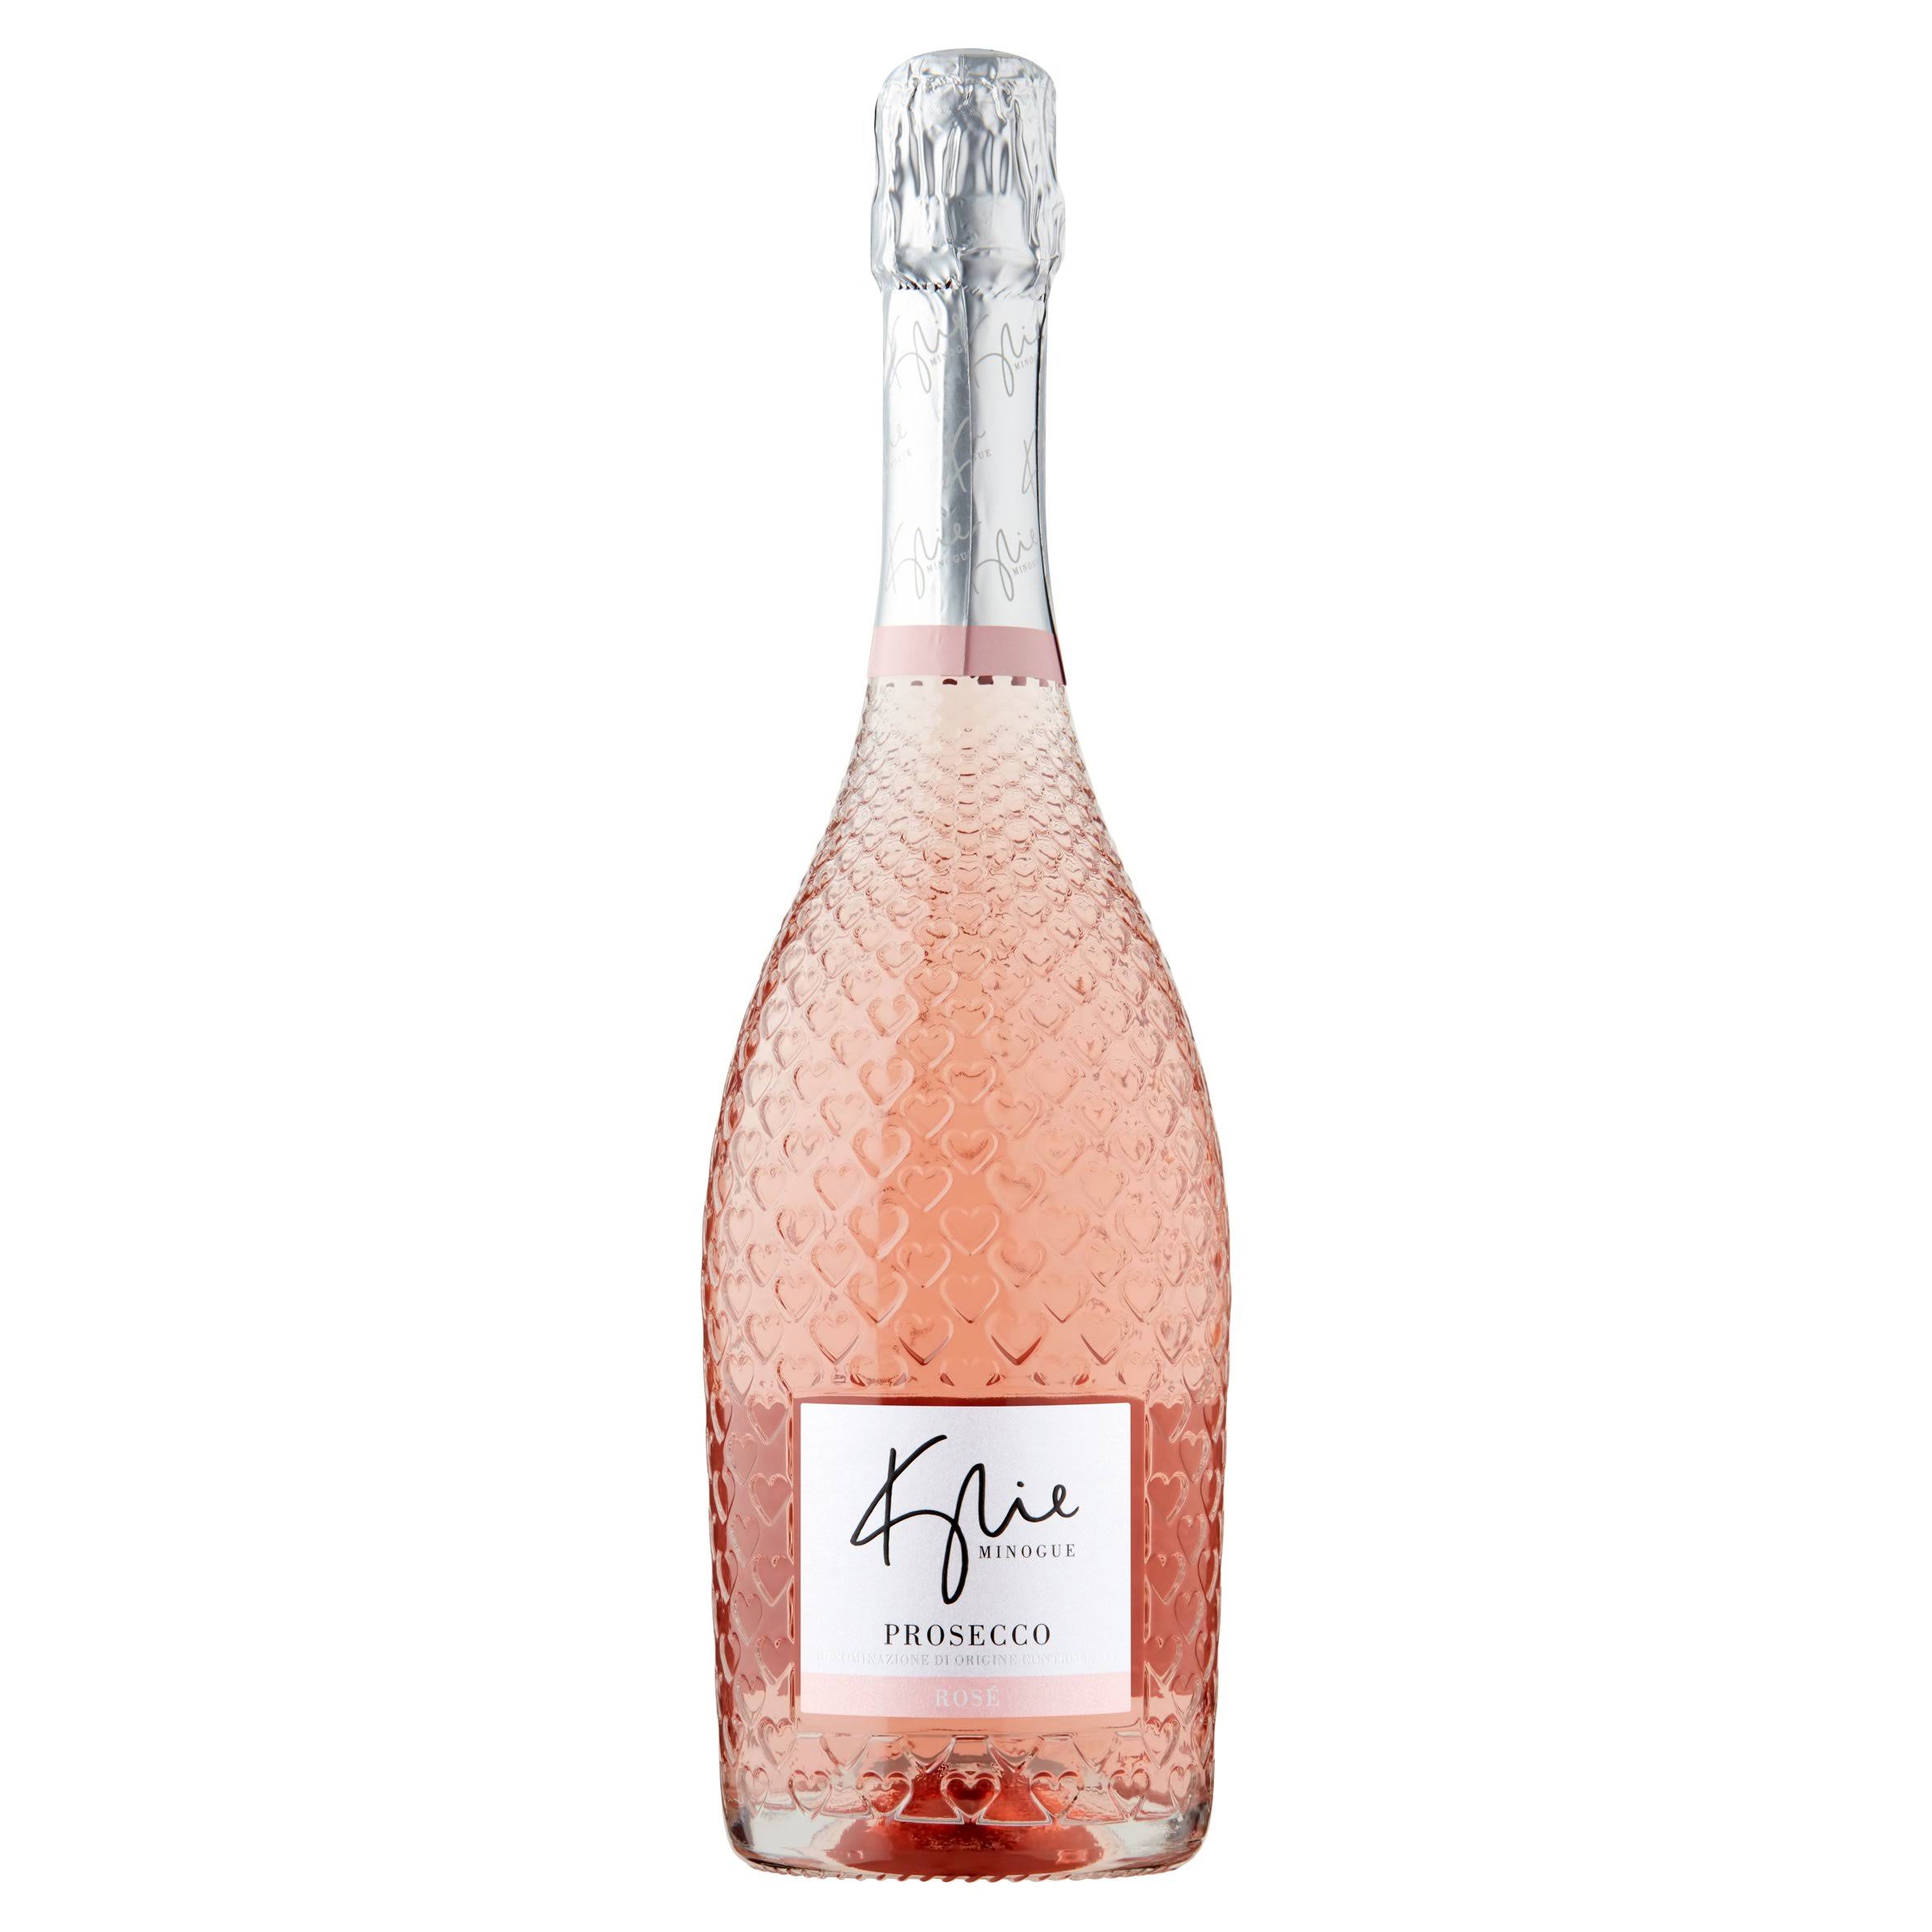 Kylie Minogue The Signature Prosecco Rosé (Italy)